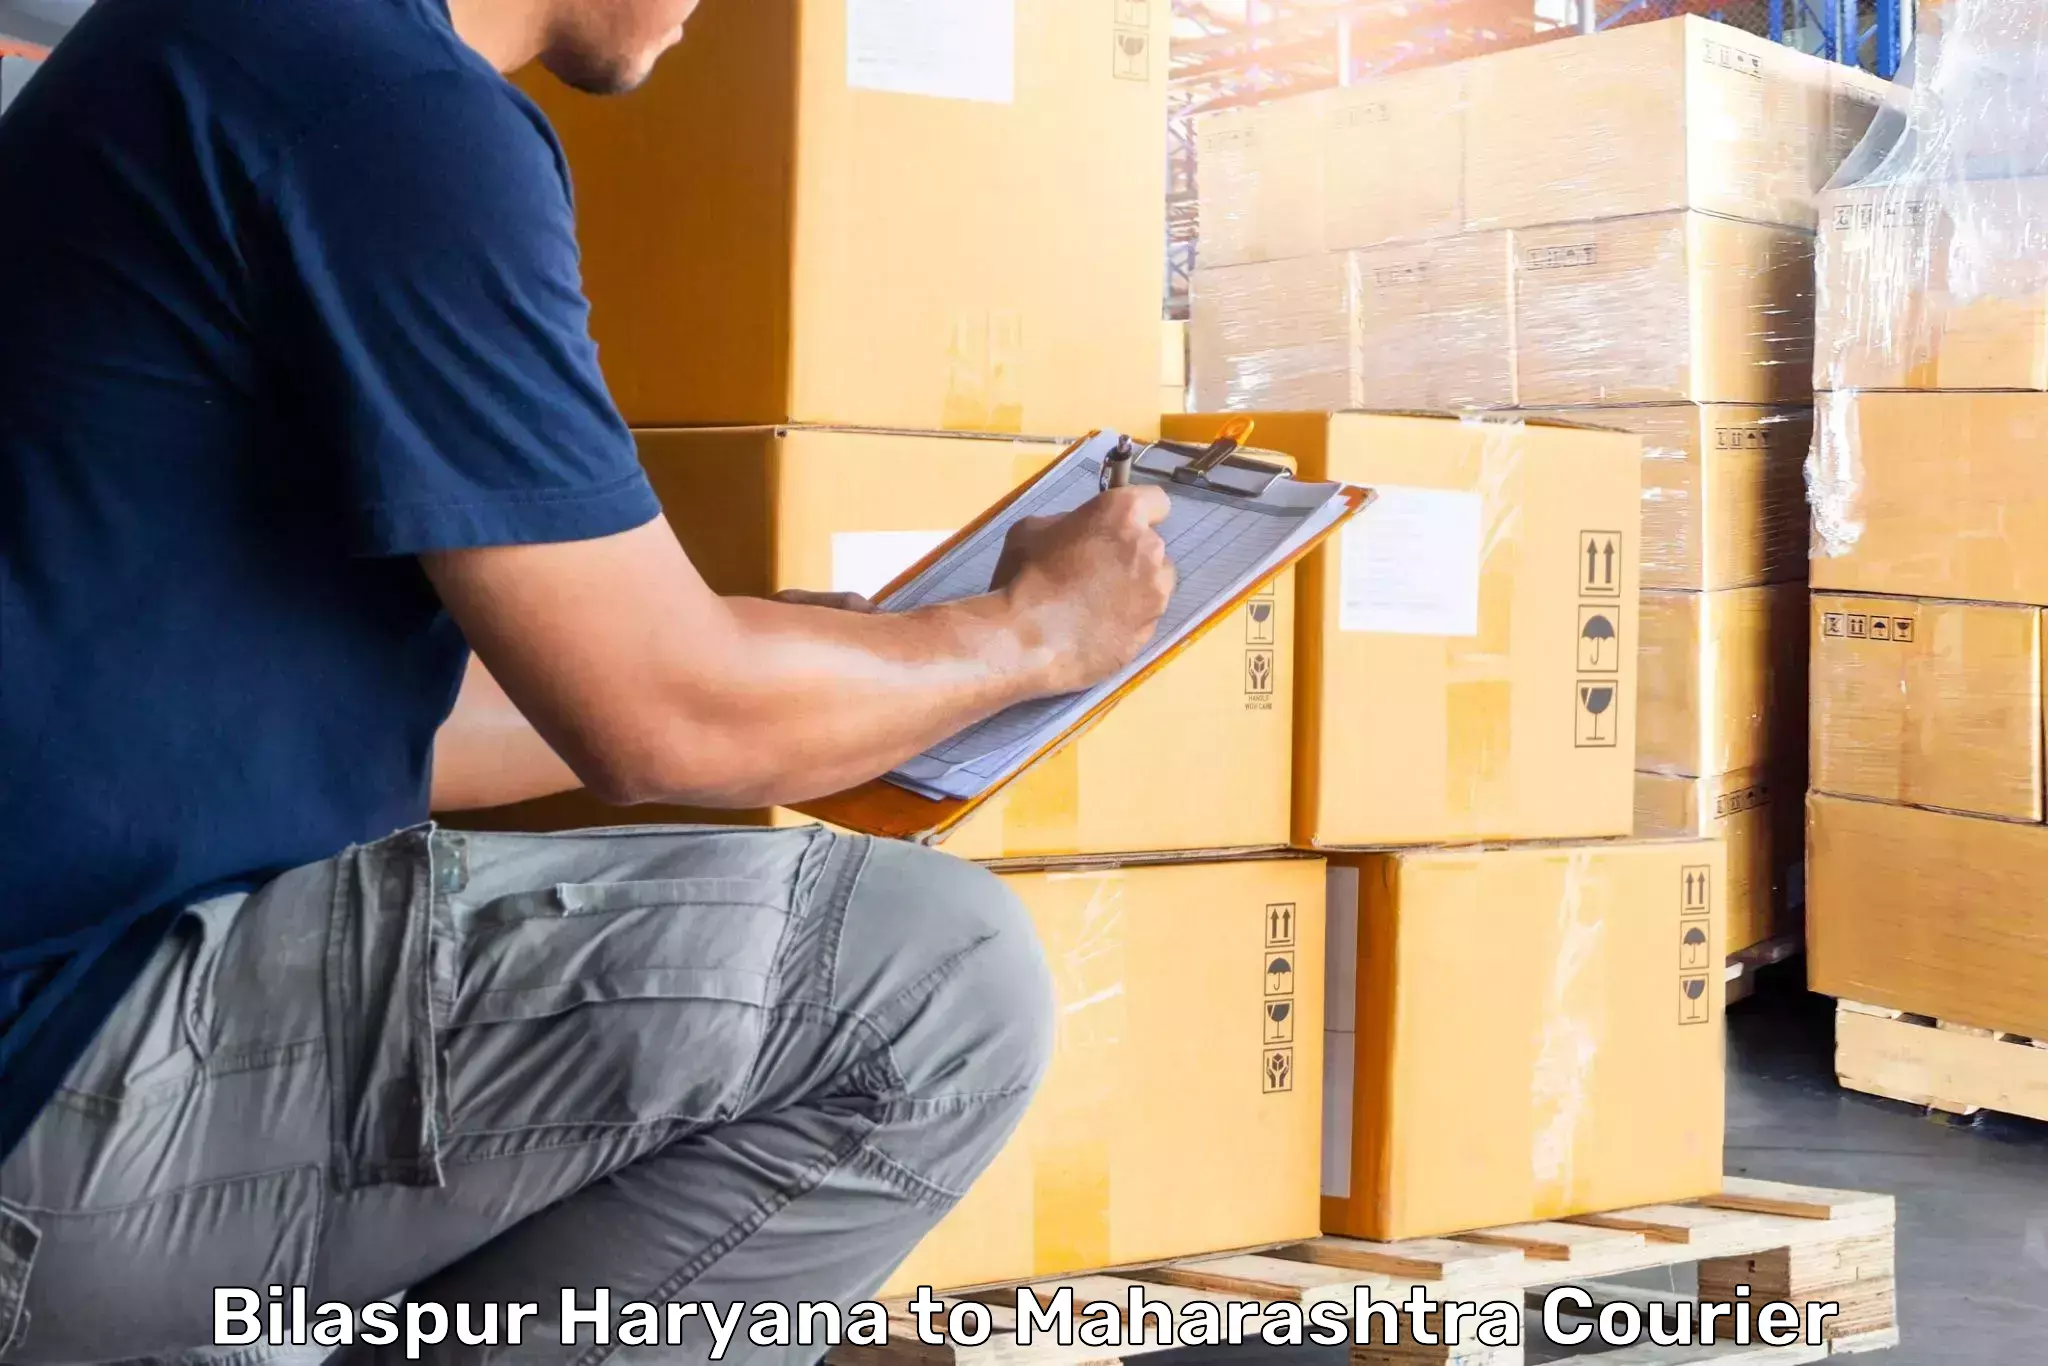 Luggage delivery app Bilaspur Haryana to Paithan